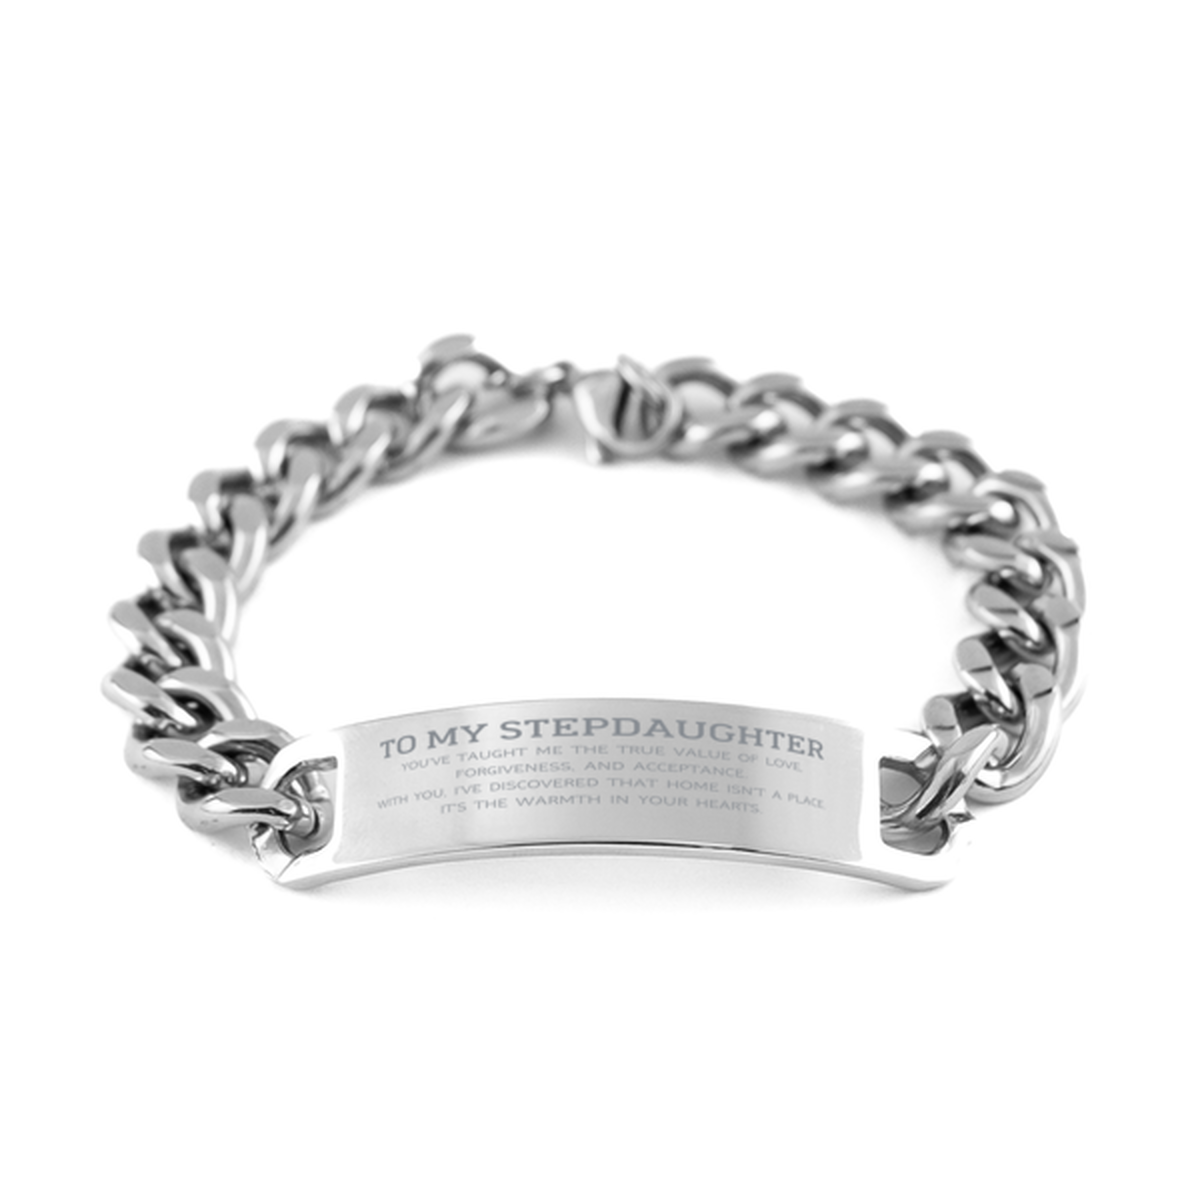 To My Stepdaughter Gifts, You've taught me the true value of love, Thank You Gifts For Stepdaughter, Birthday Cuban Chain Stainless Steel Bracelet For Stepdaughter